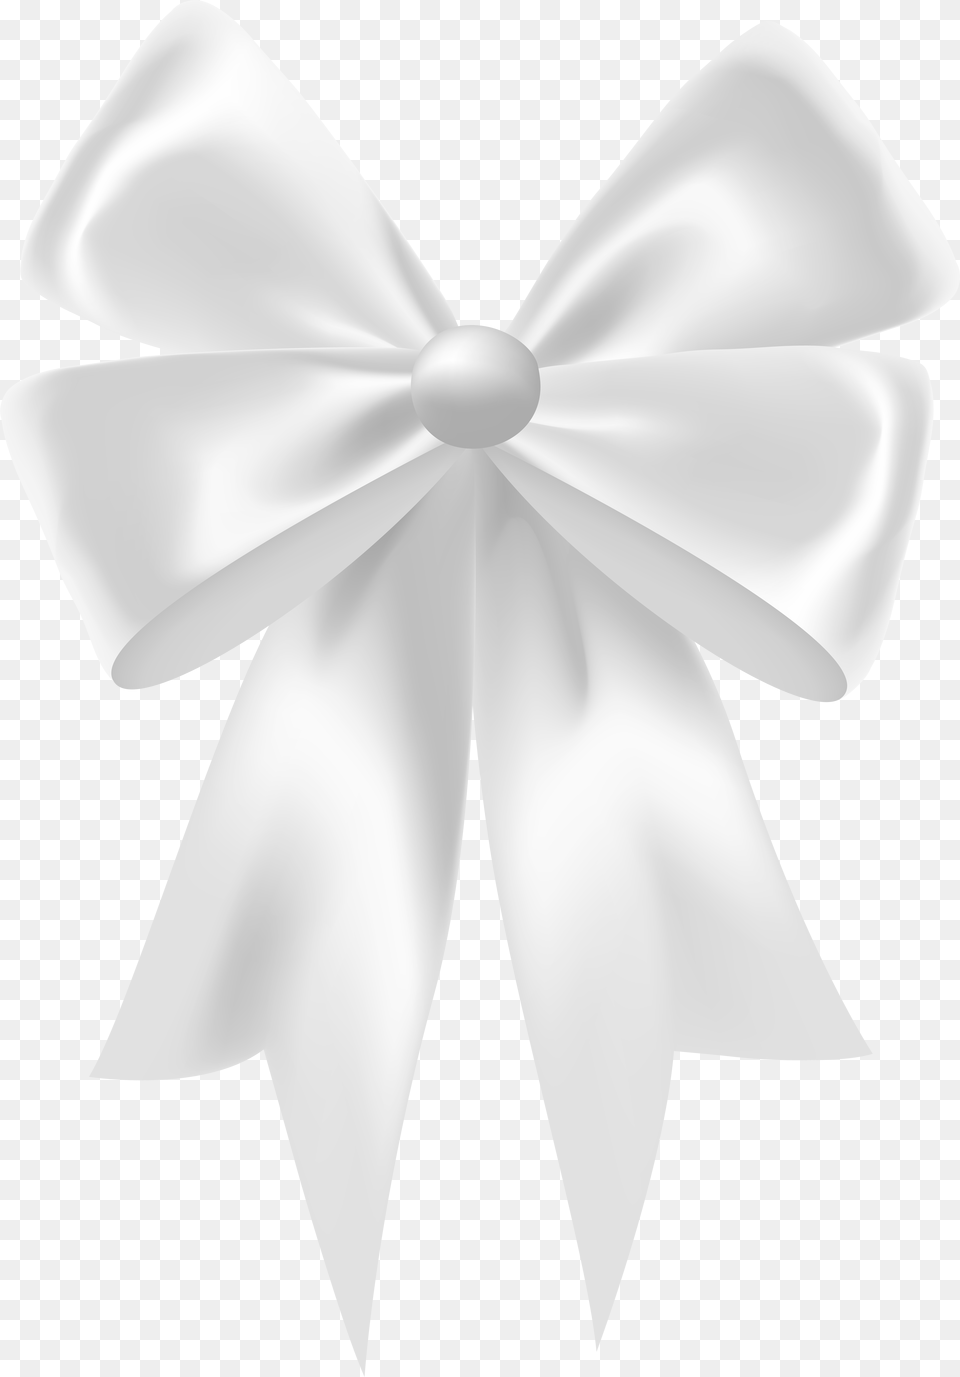 White Satin Bow Clip Art Image Satin, Accessories, Formal Wear, Tie, Cross Png